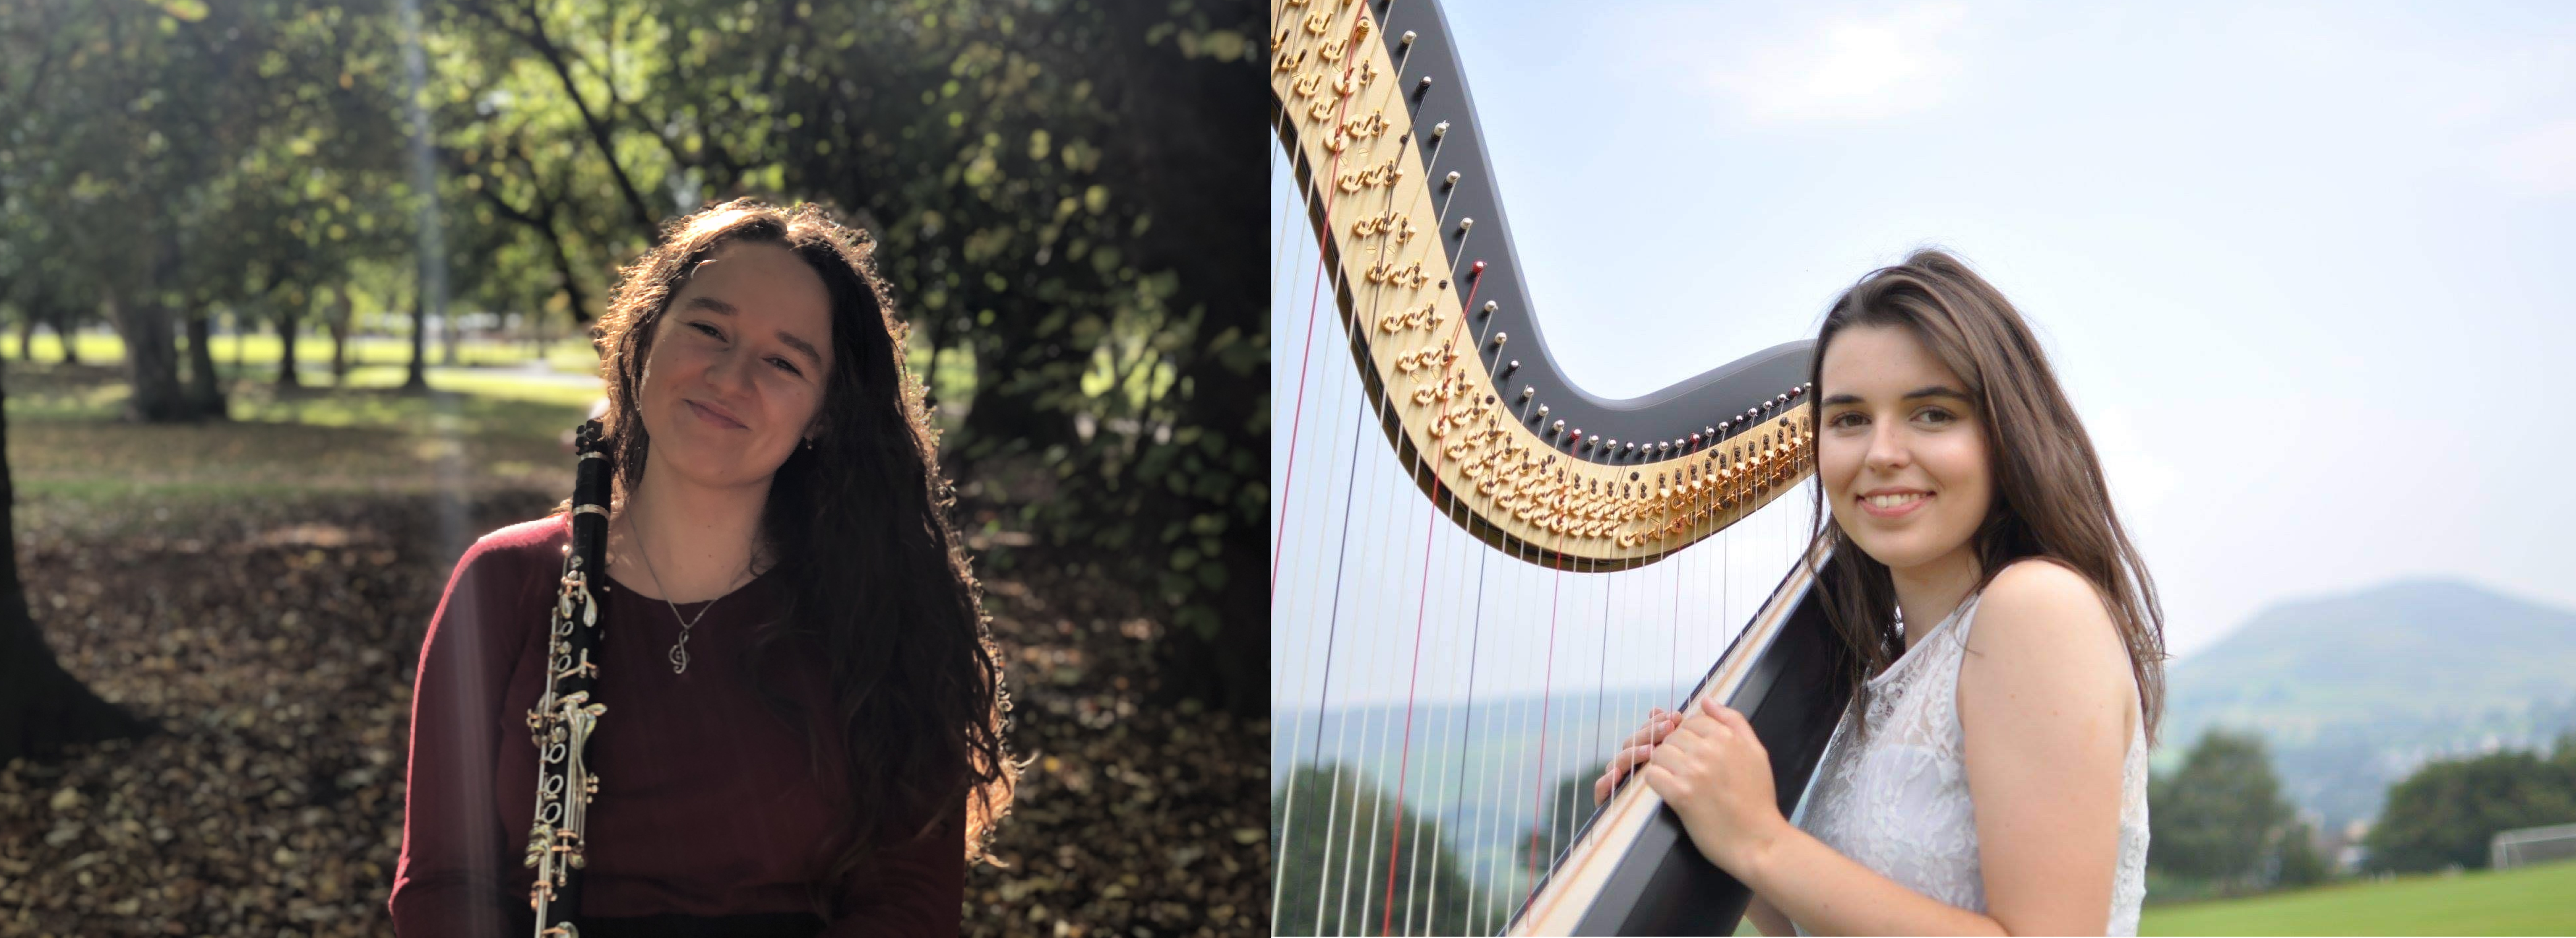 Angharad Huw and Laurel Saunders of Eos duo in side by side countryside photos